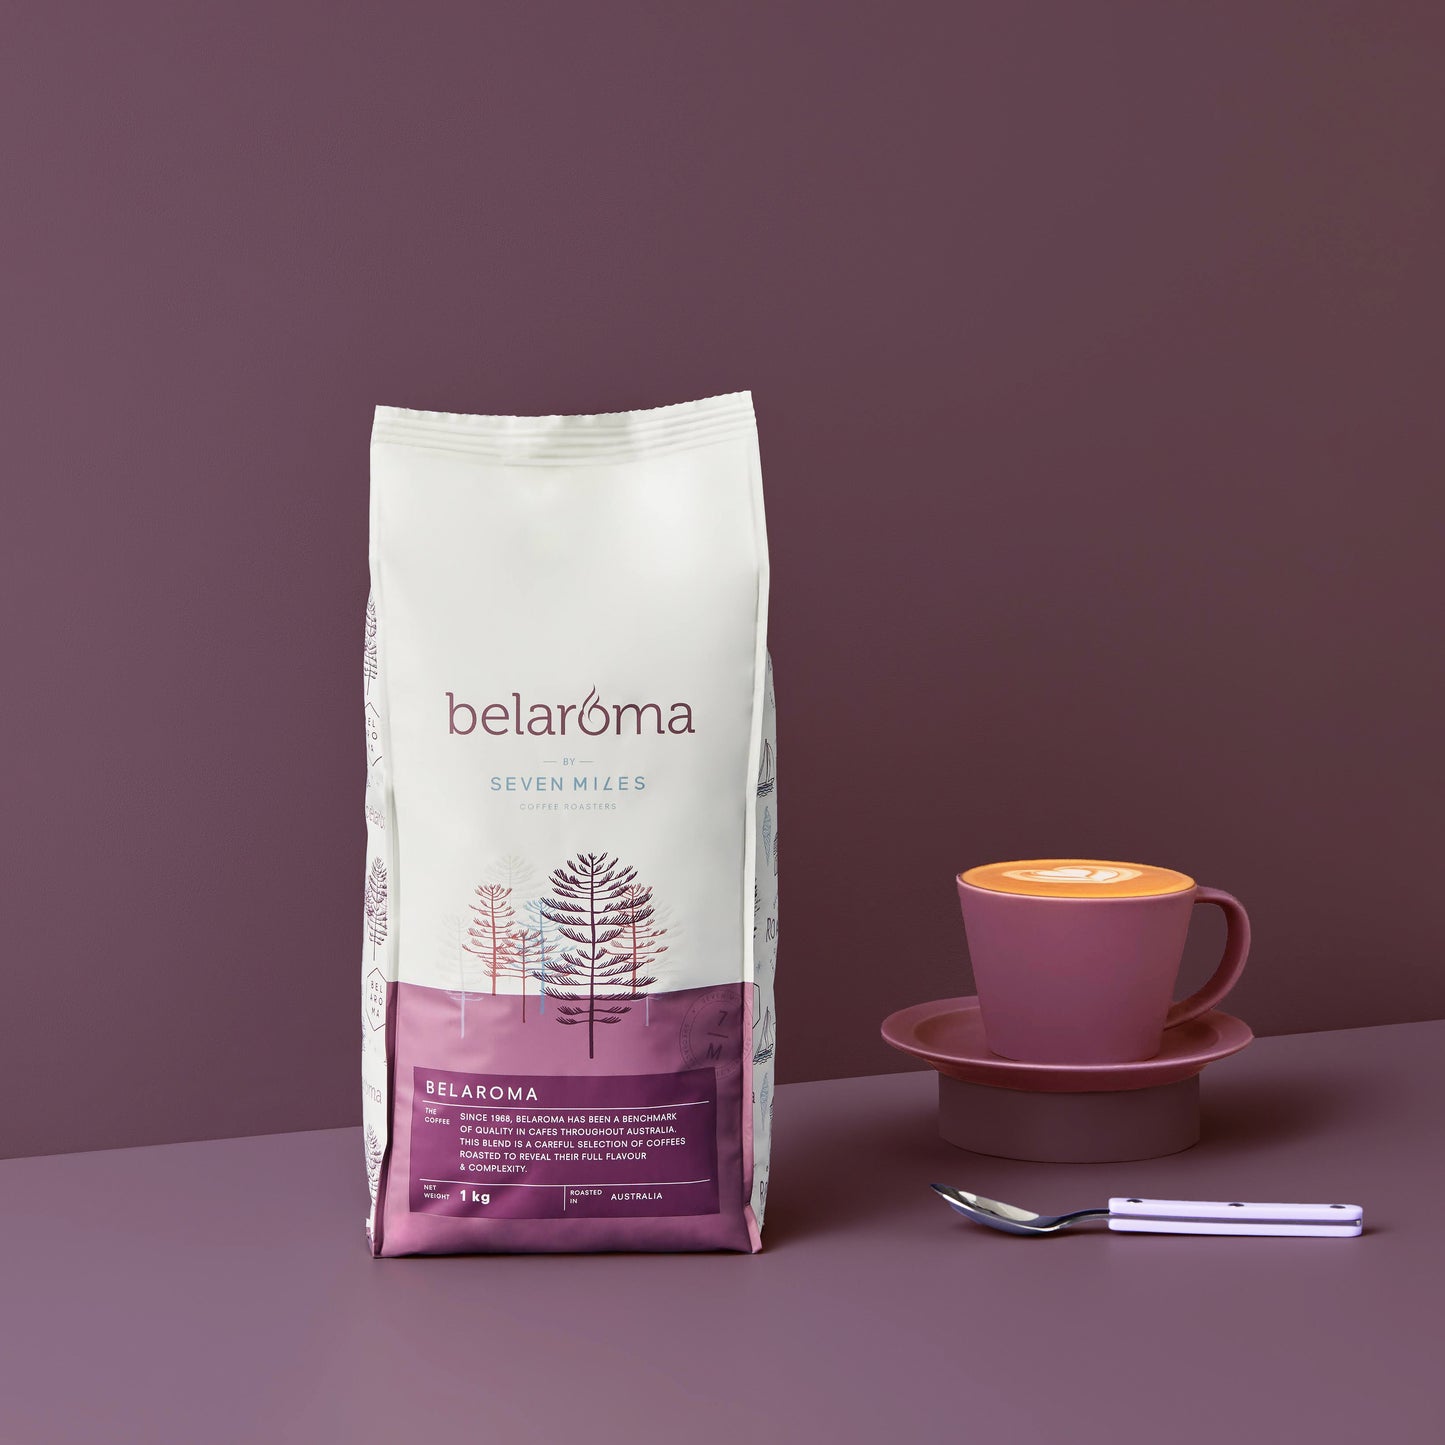 1kg bag of Belaroma Coffee by Seven Miles. Deep purple background with a purple mug and saucer and teaspoon.